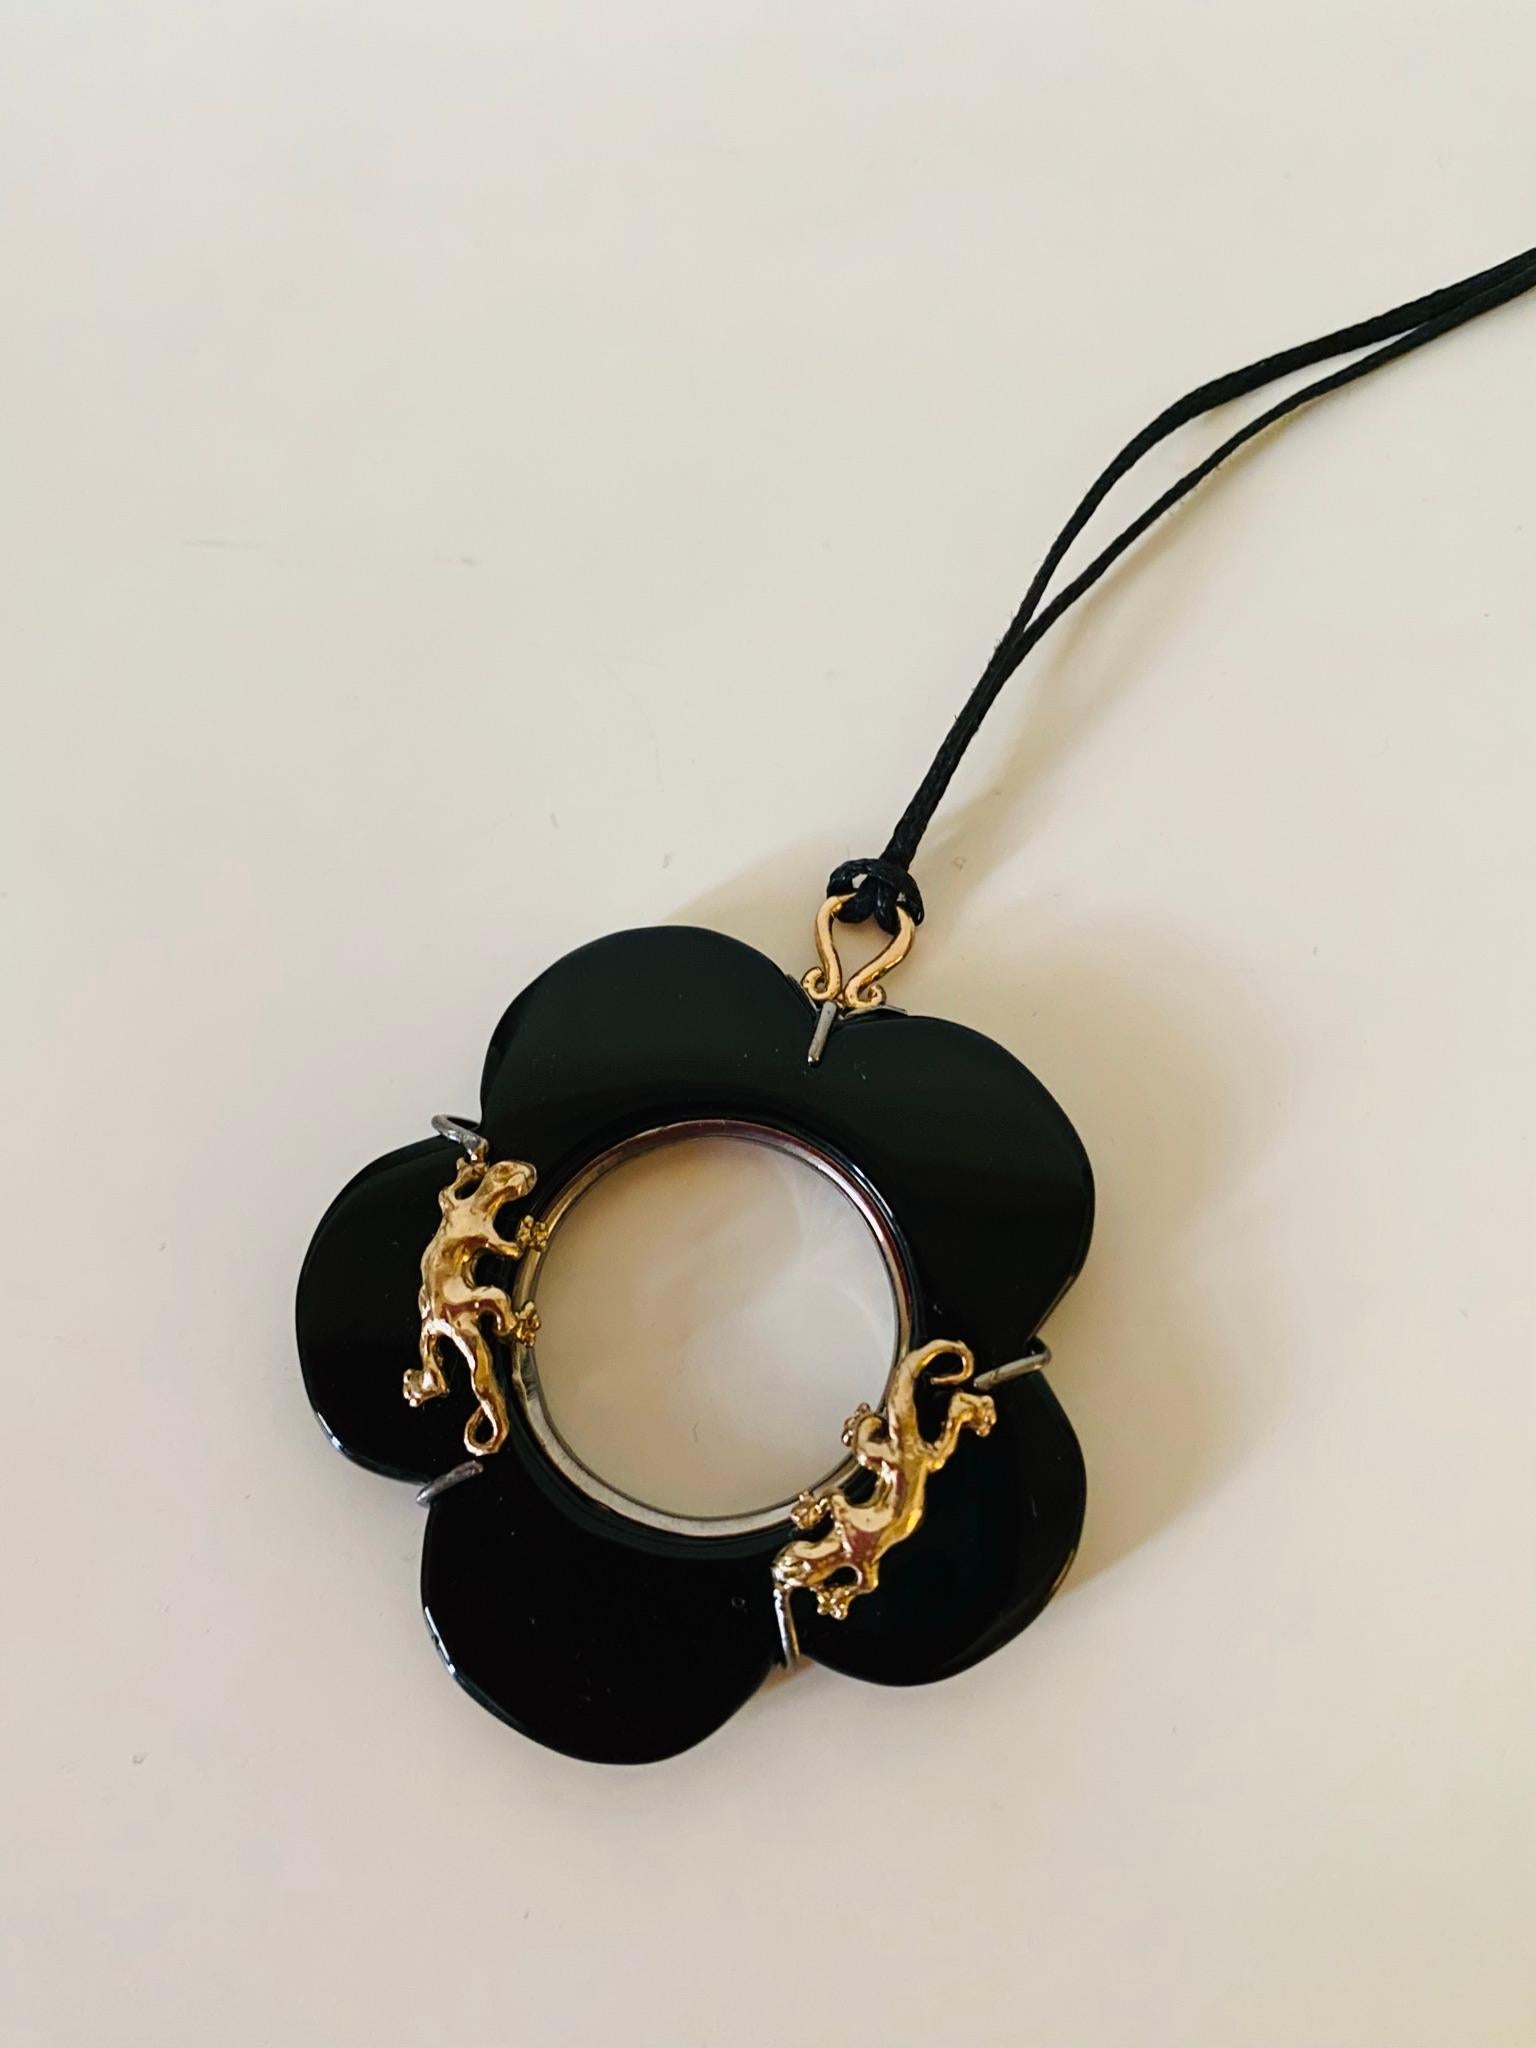 Artisan Onyx Flower Necklace Pendent 24 karat Gold Plated Silver Sterling Rope Necklace For Sale